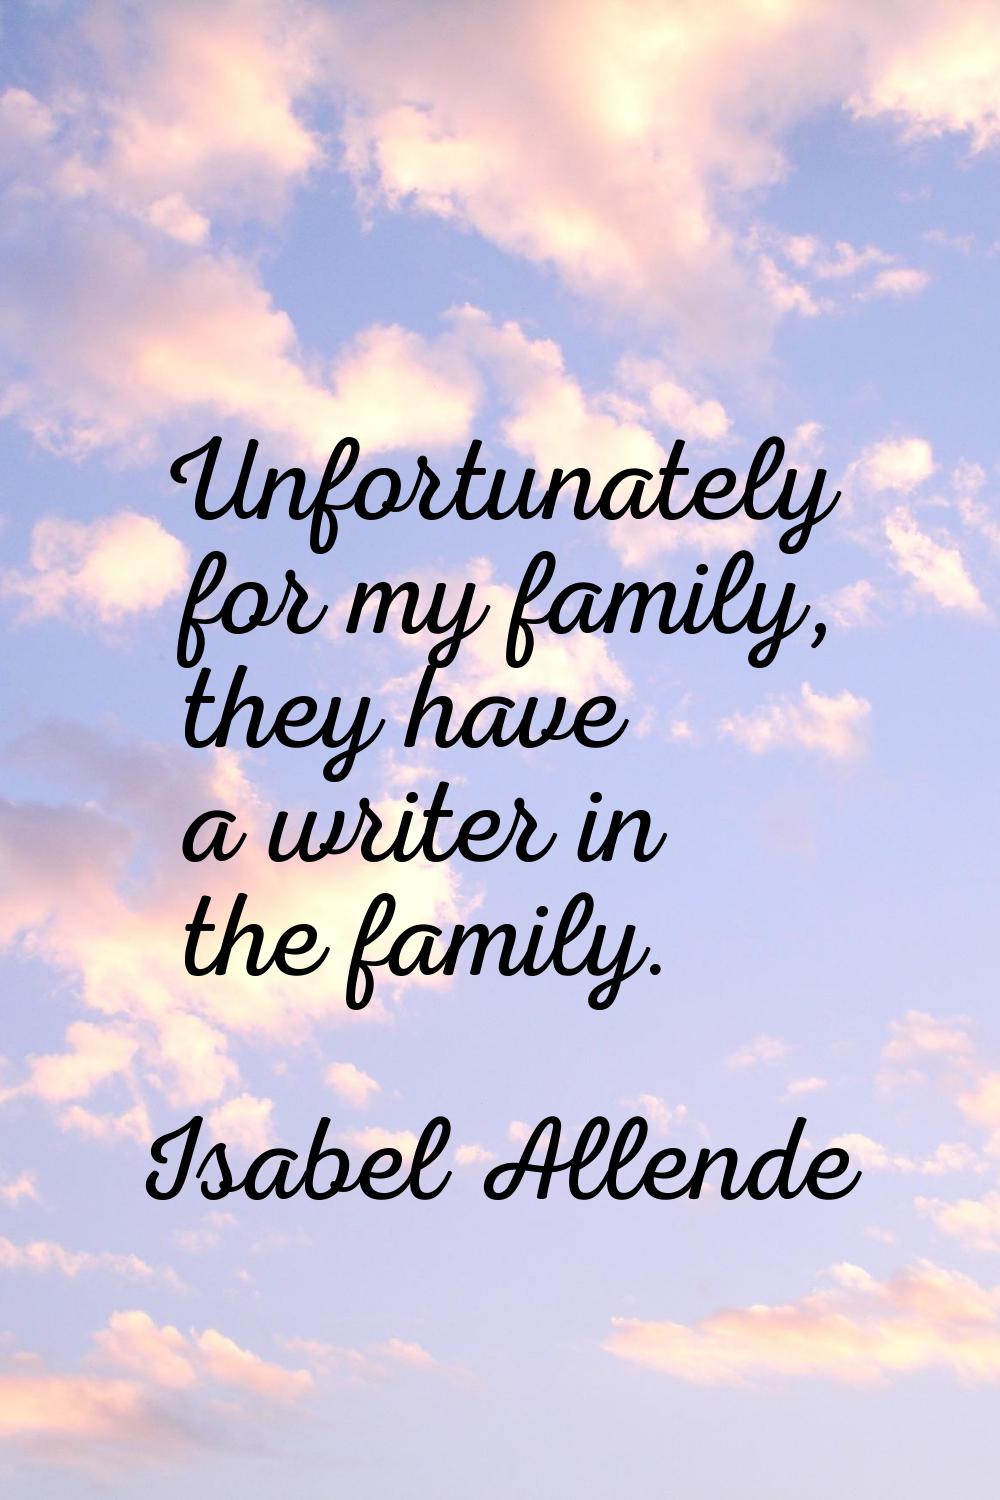 Unfortunately for my family, they have a writer in the family.